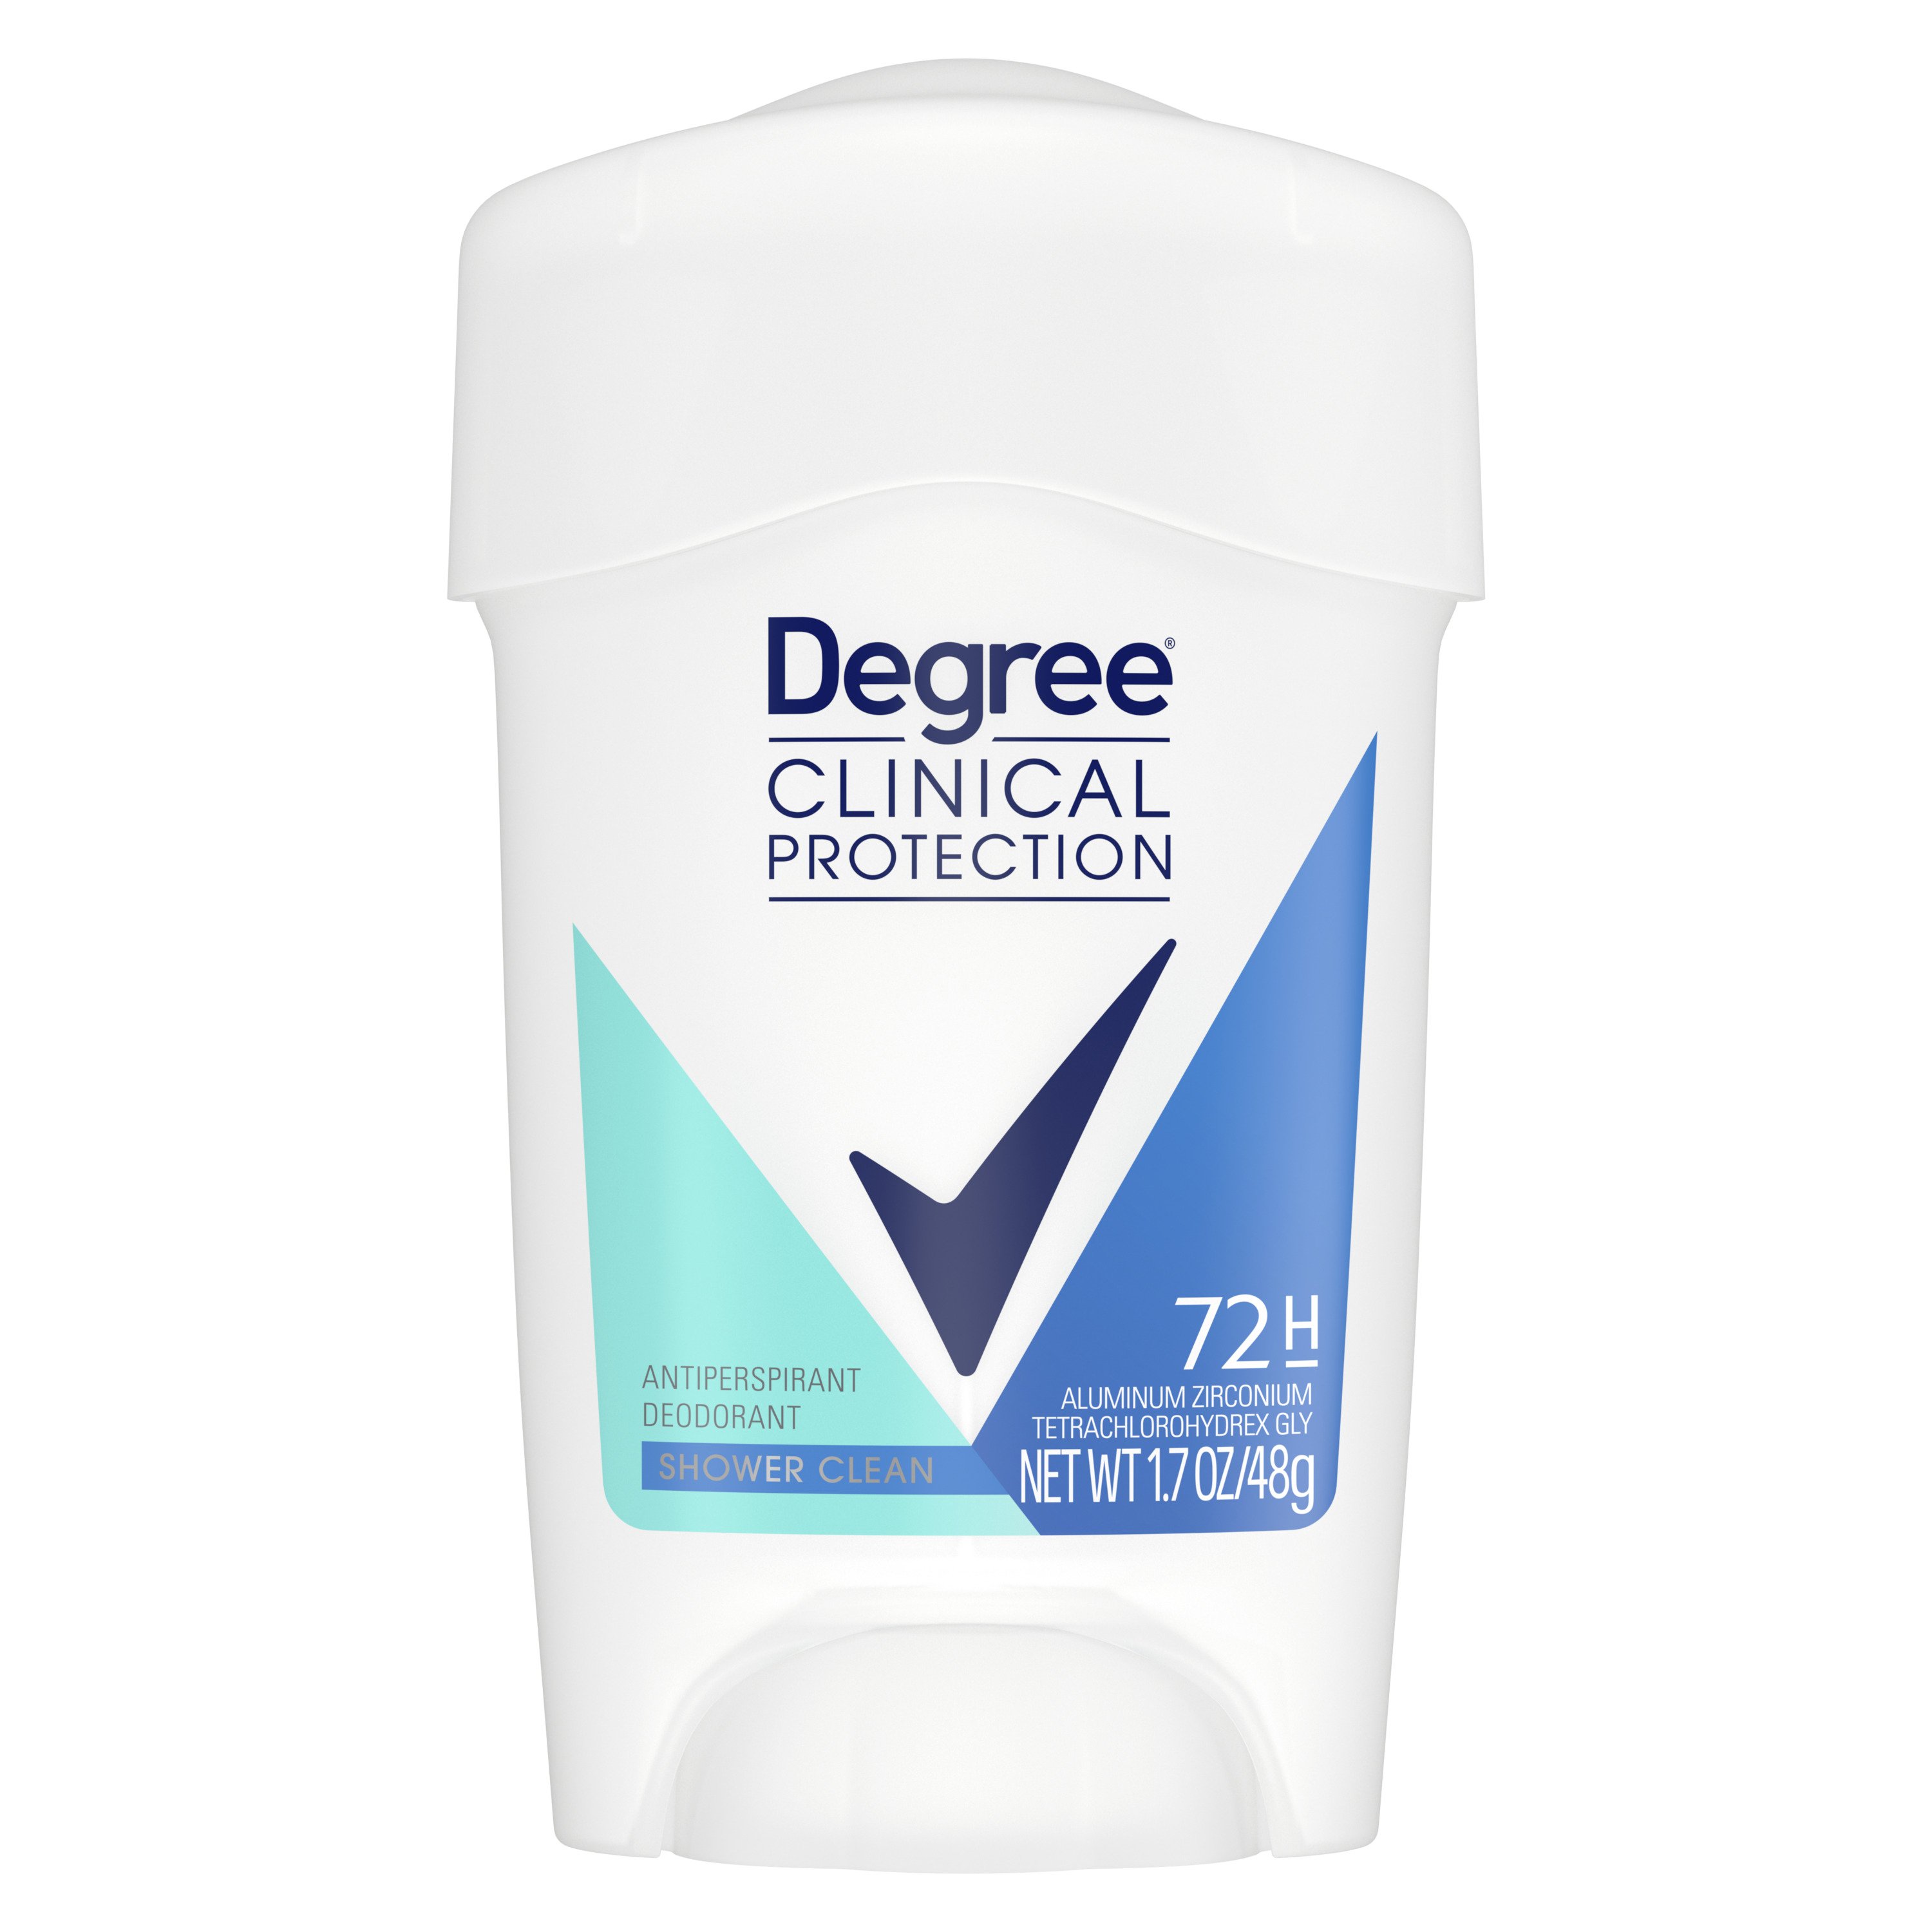 Degree Clinical Protection Antiperspirant Deodorant Shower Clean - Shop Bath & Care at H-E-B